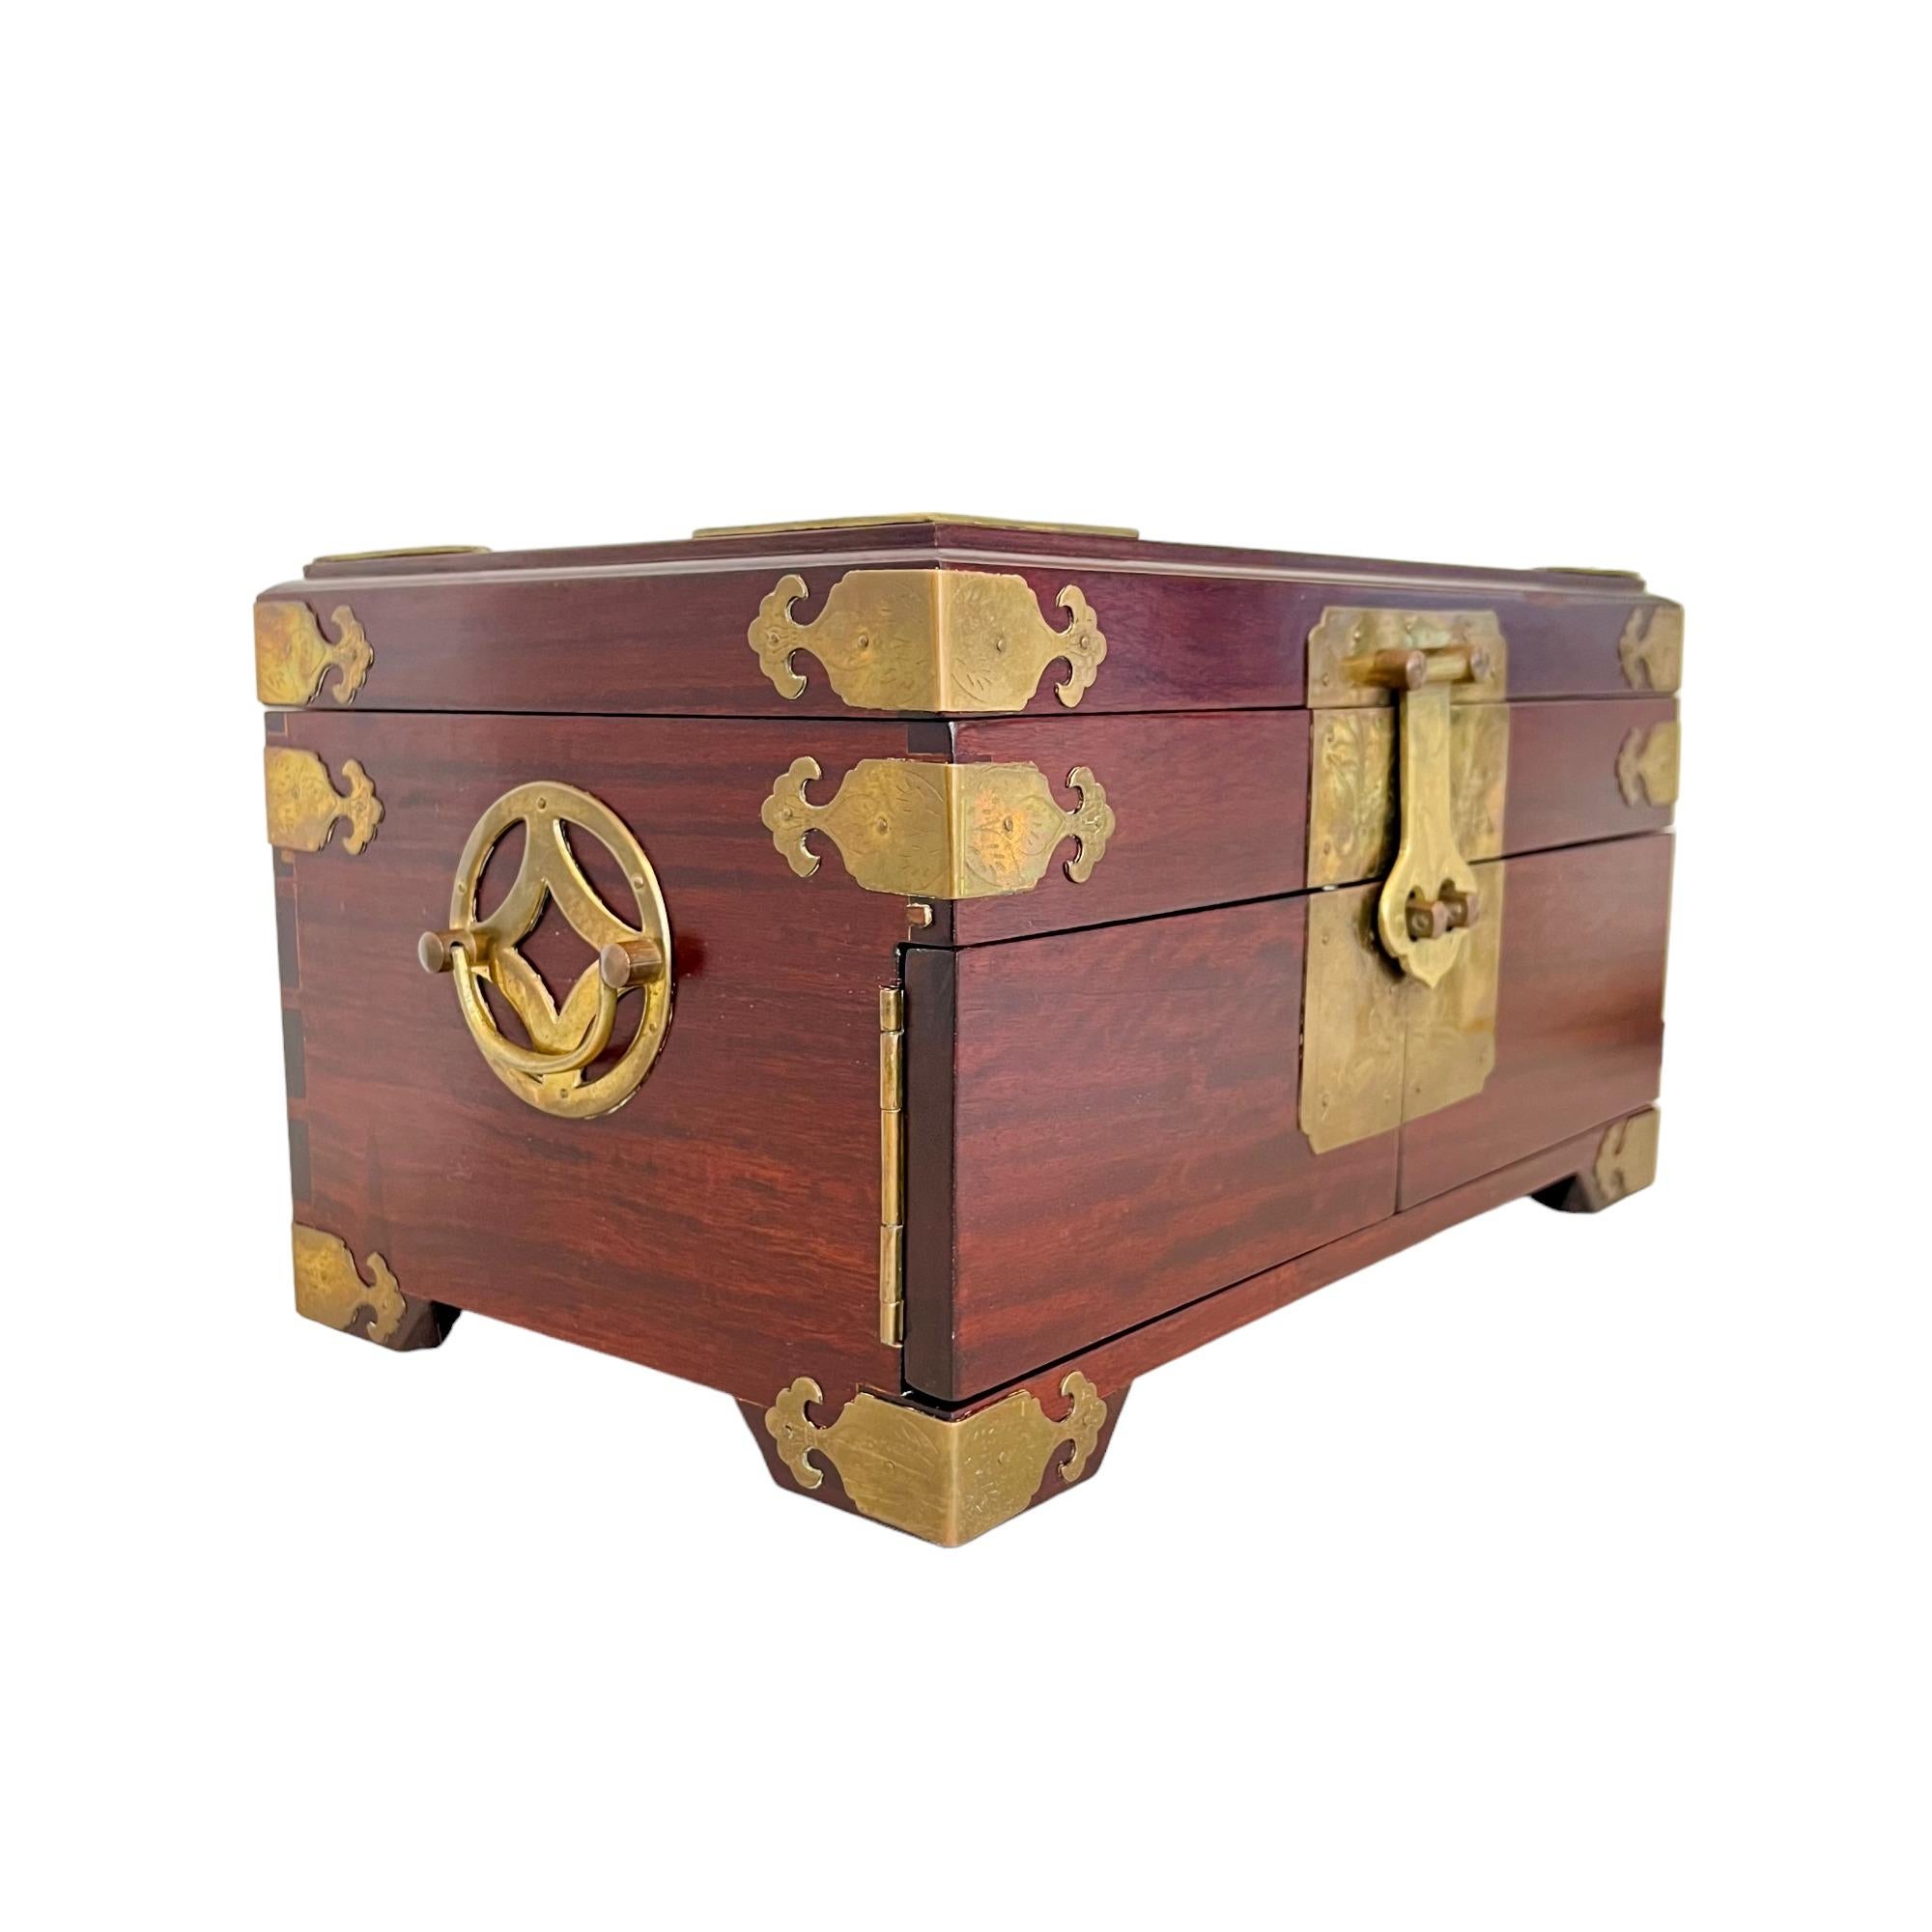 A vintage George Zee Chinese jewelry storage box. This beautifully crafted chest is constructed of wood and adorned with brass accents including a Chinese 'blessing'' character on top, chased corner braces and latch plate, and medallion style side